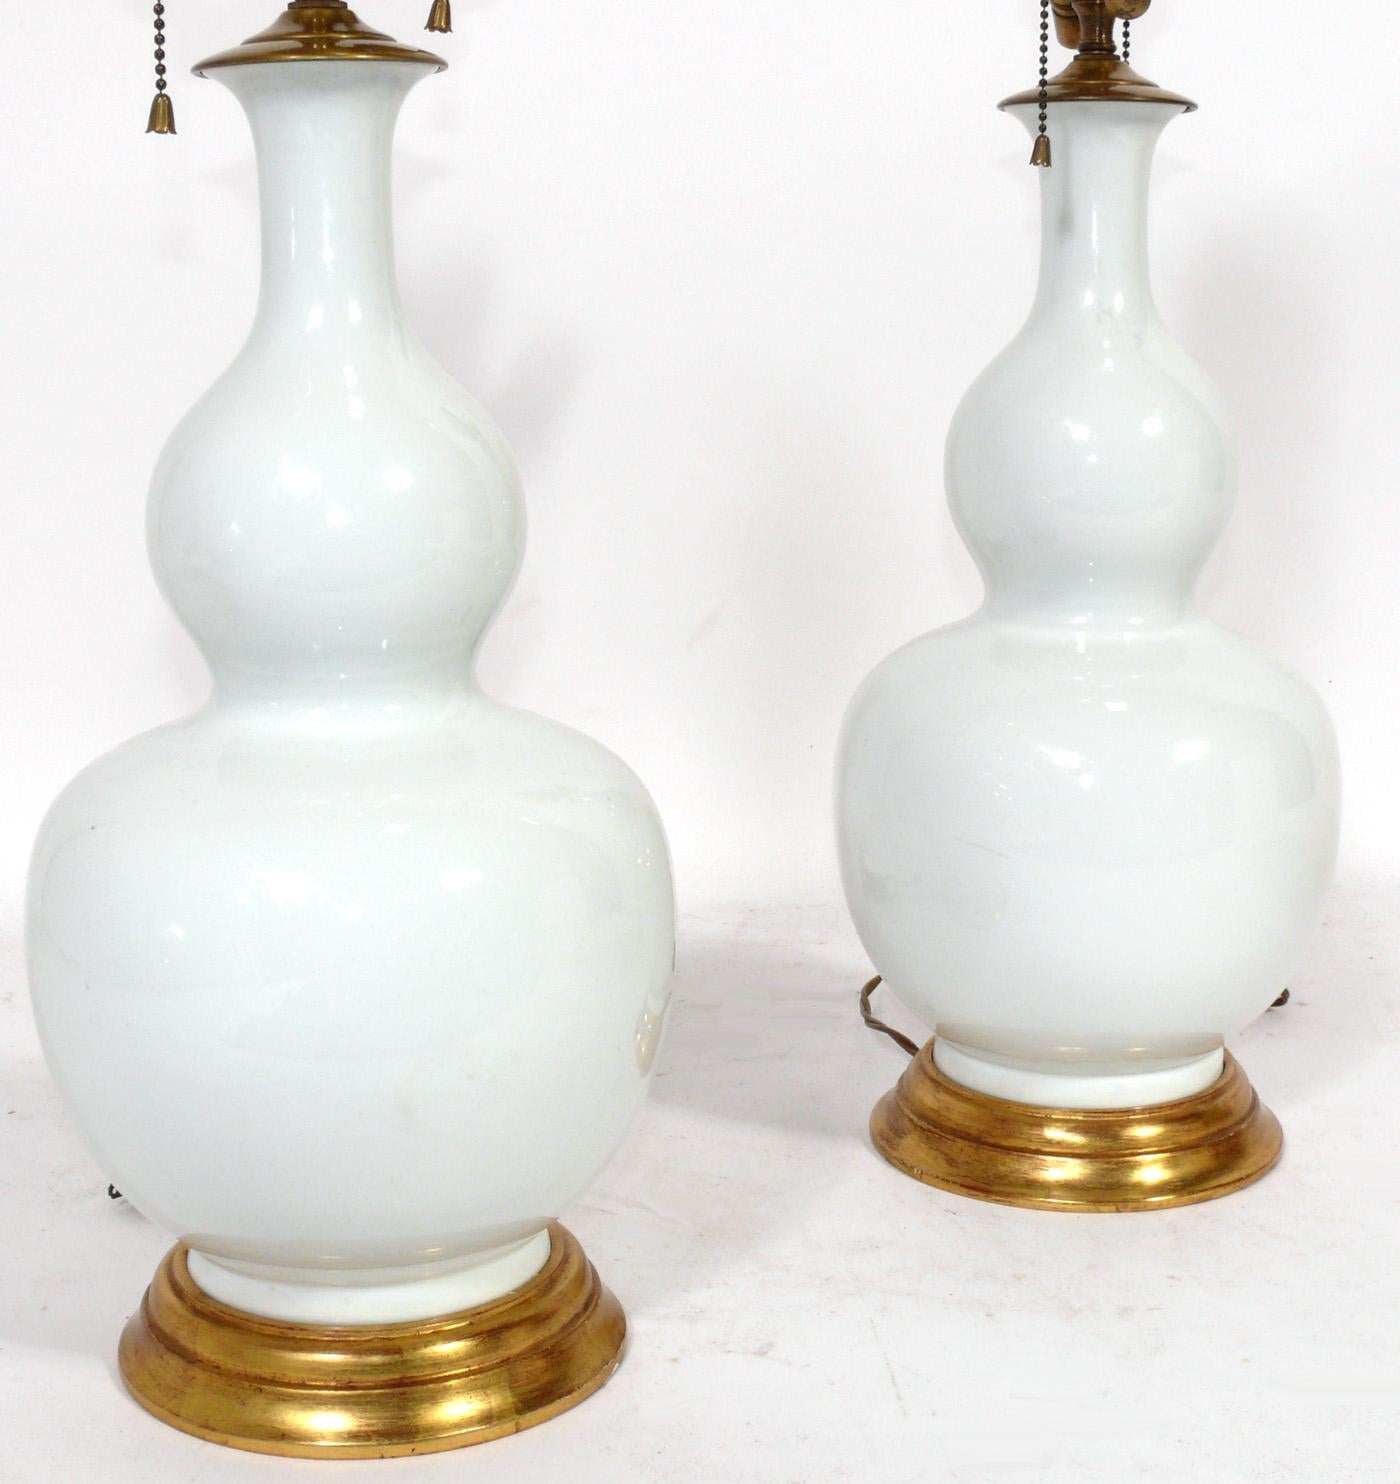 Pair of Elegant Double Gourd Aurora Lamps by Christopher Spitzmiller, New York City, New York, American, circa 2000s. Signed with Spitzmiller label to one lamp, see last photo. They are constructed of hand thrown ceramic vessels with 23 karat gilt